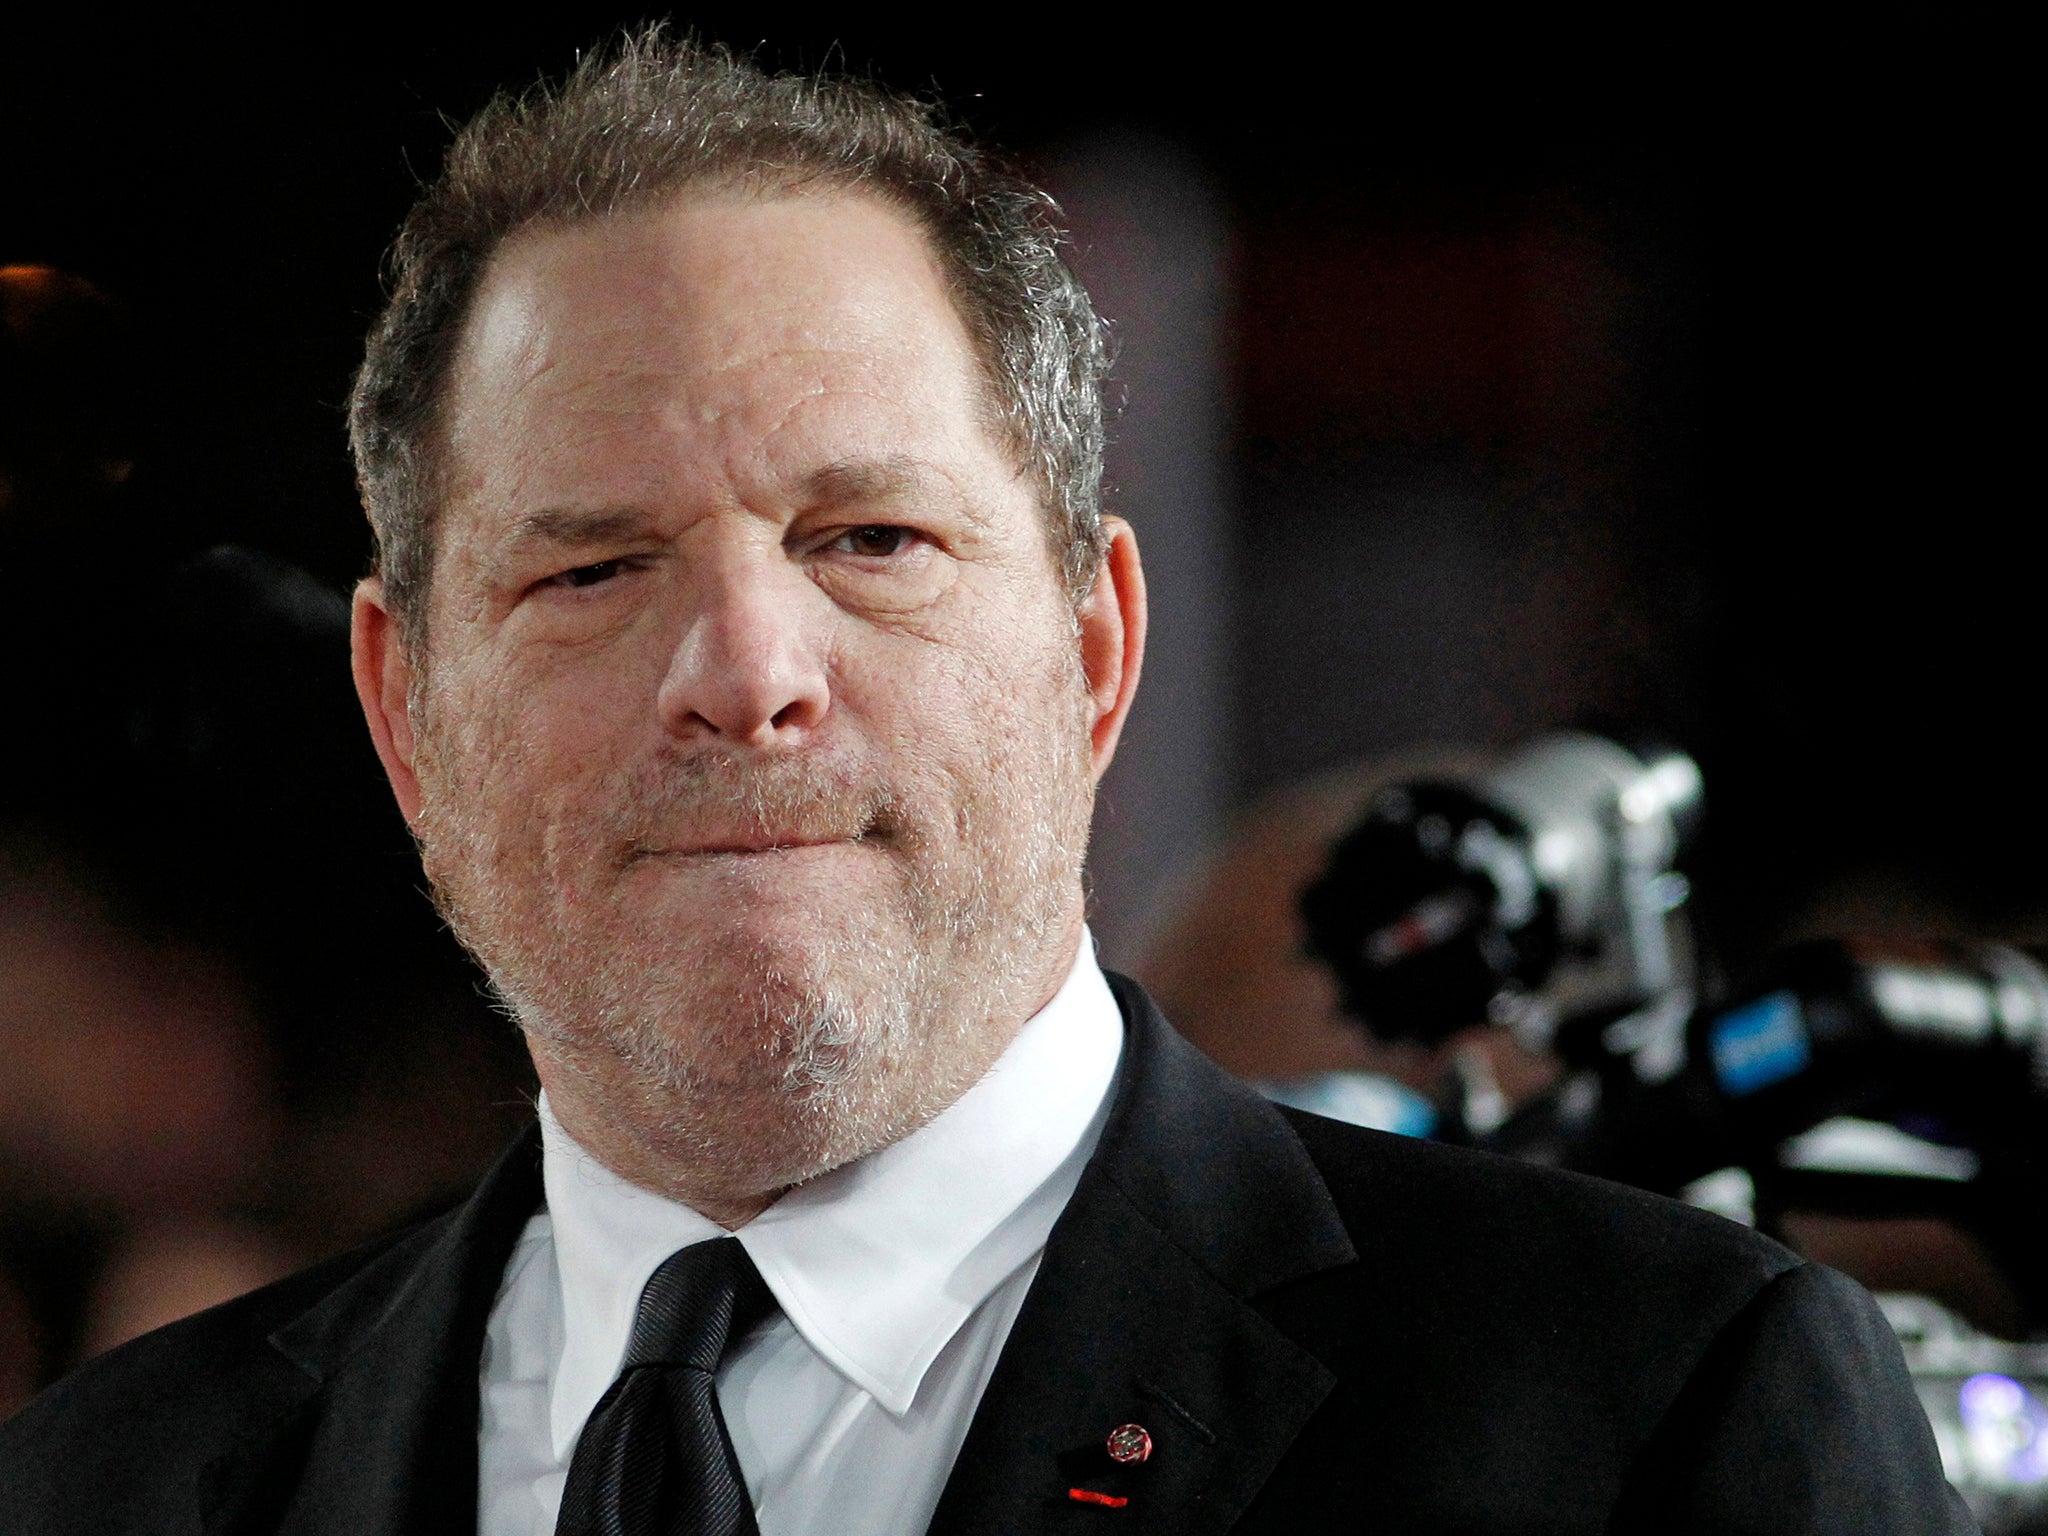 Harvey Weinstein has been accused of rape and sexual harassment